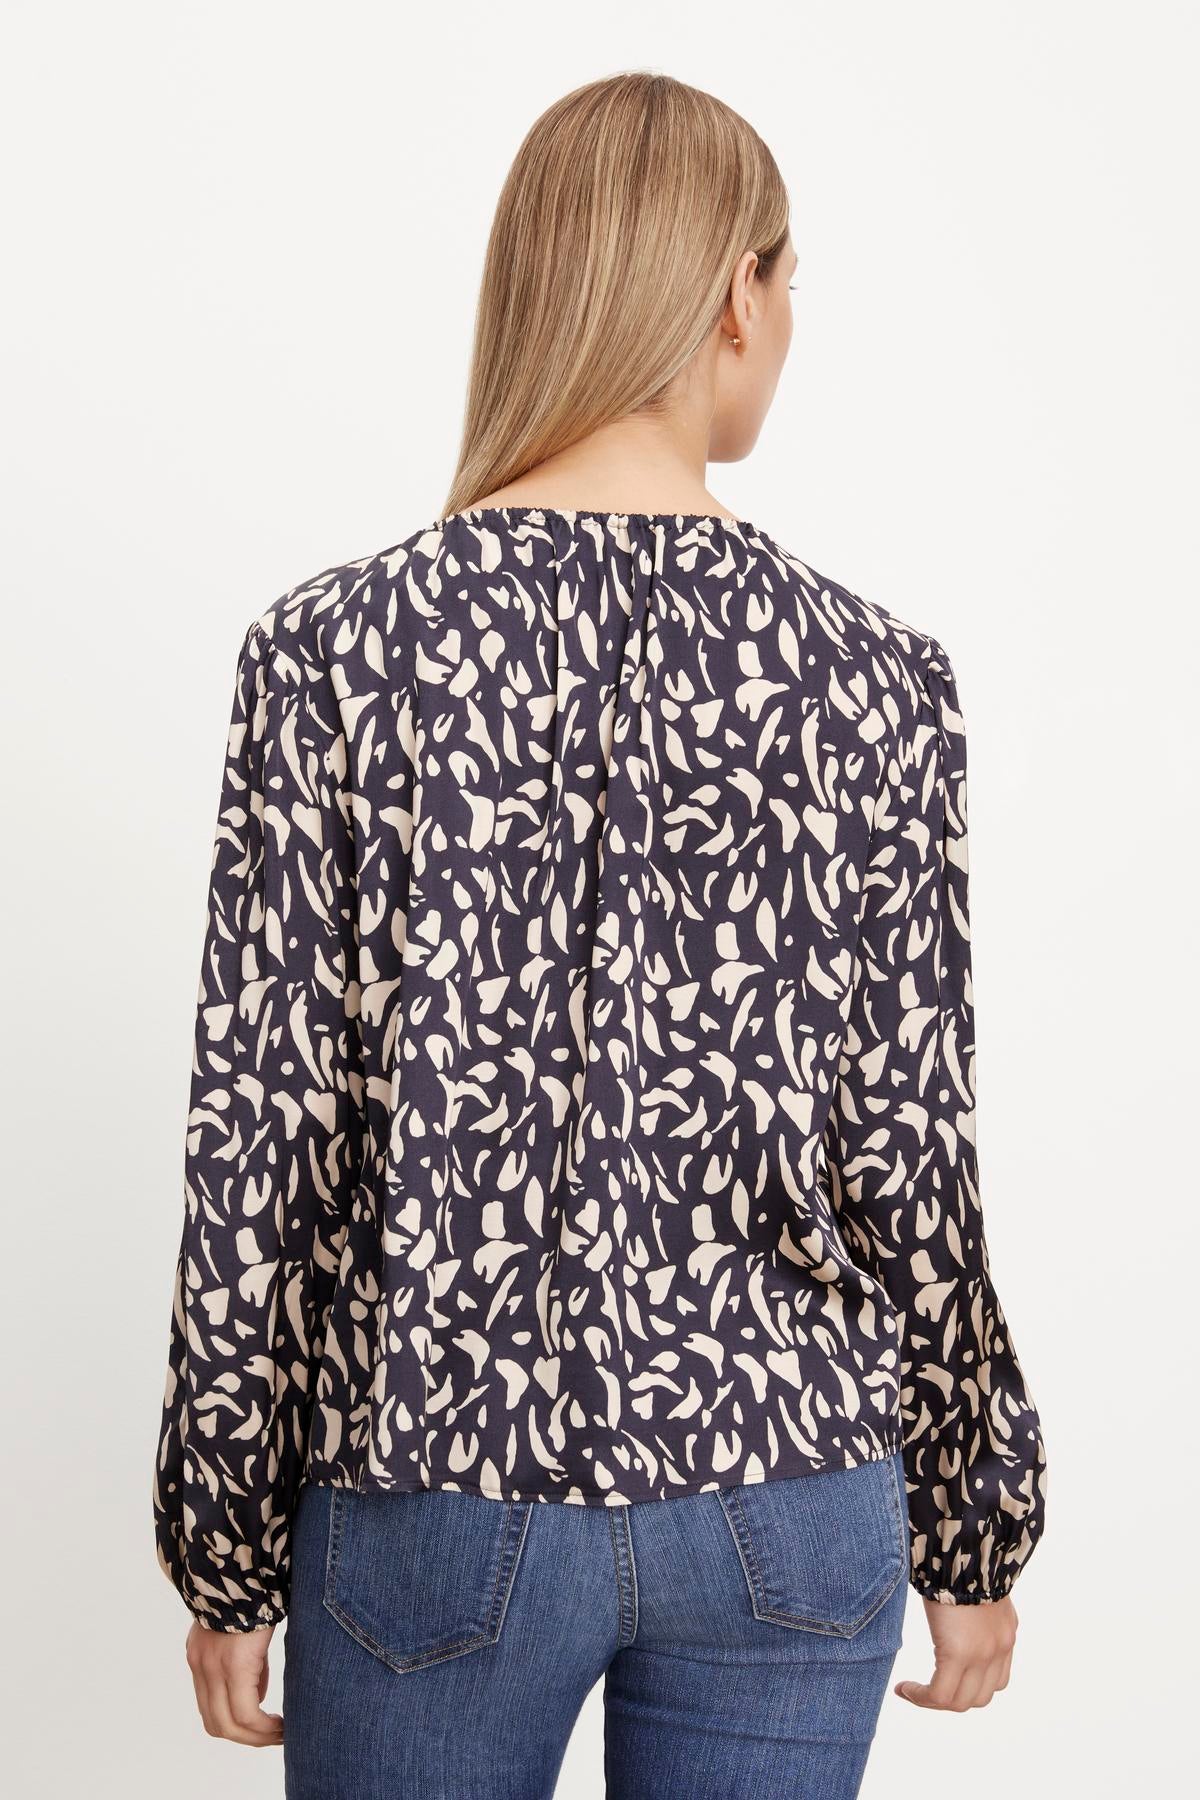   The back view of a woman wearing jeans and a Velvet by Graham & Spencer KADE PRINTED PEASANT BLOUSE with a floral print. 